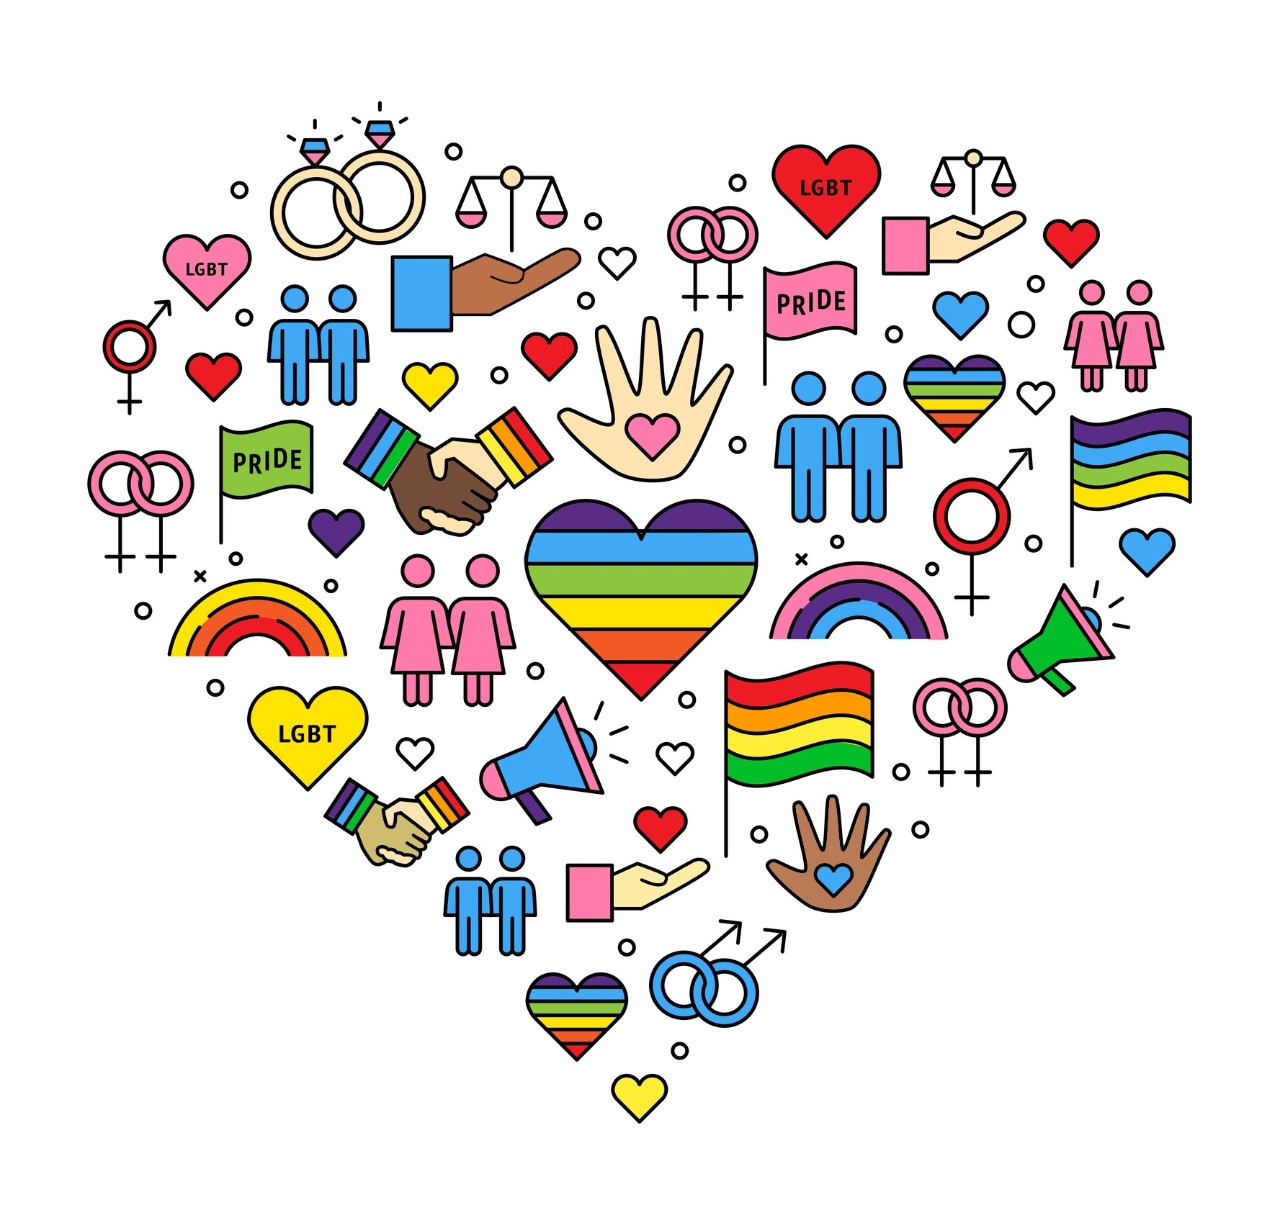 LGBT call to action icons in the shape of a heart.